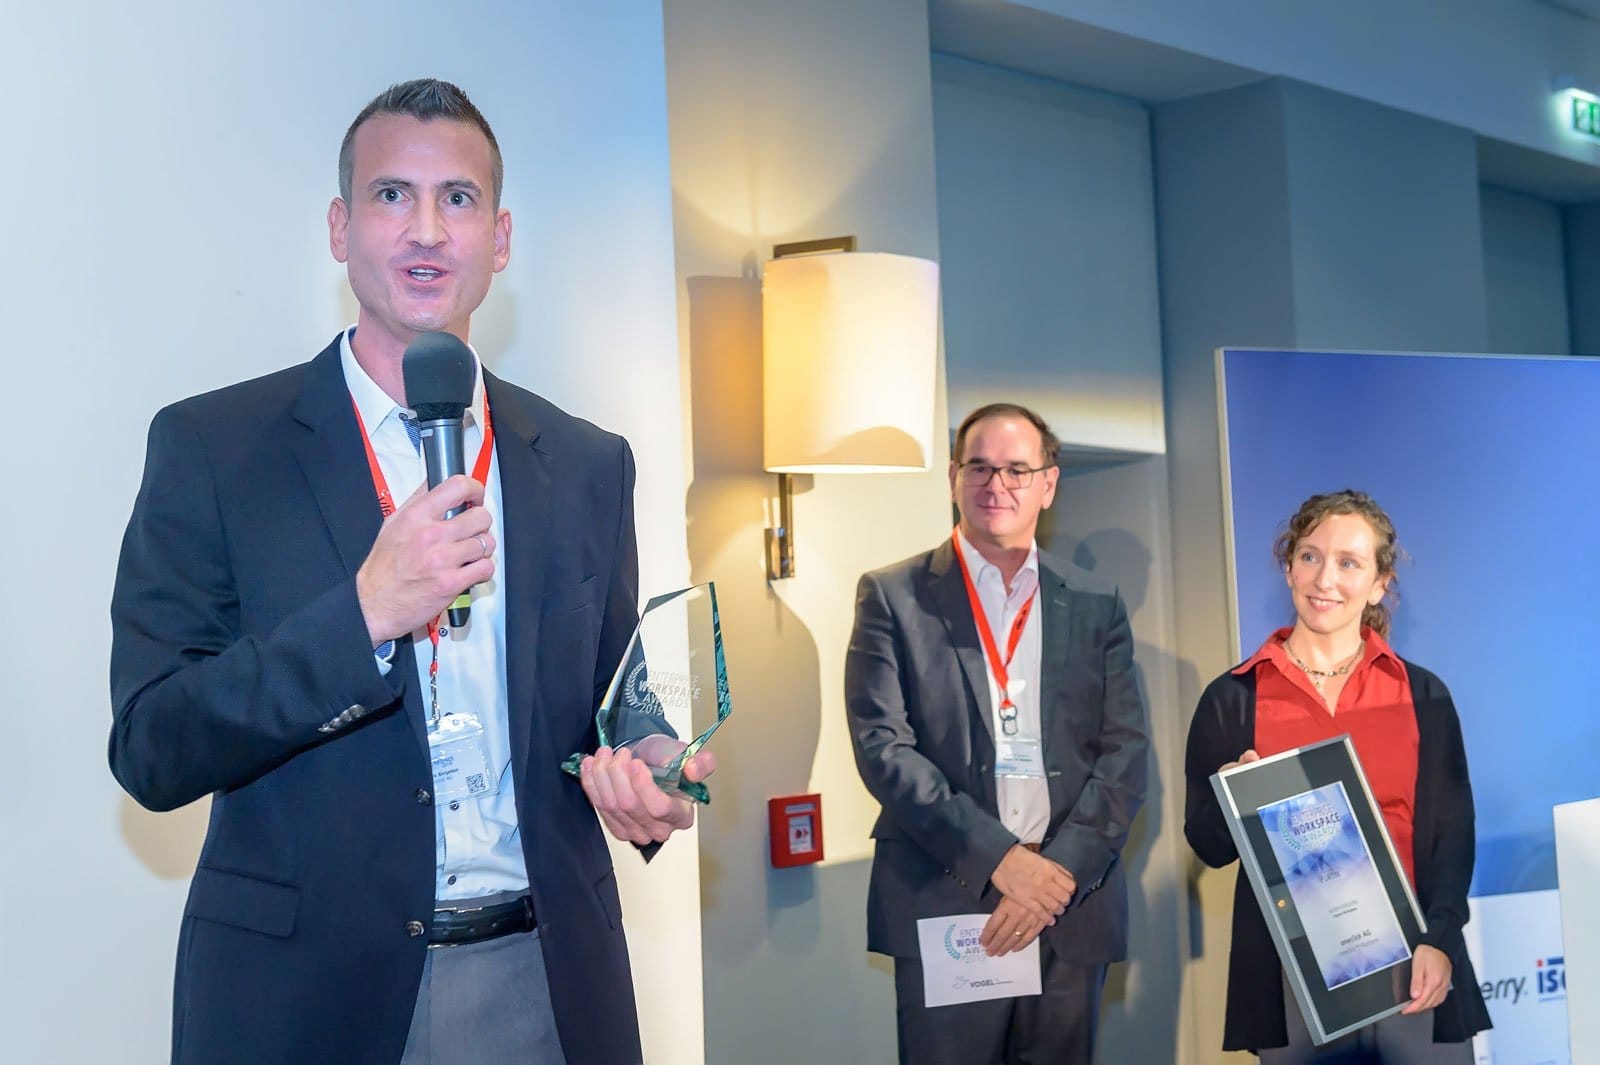 Dominik Birgelen, CEO of oneclick AG, at the award ceremony